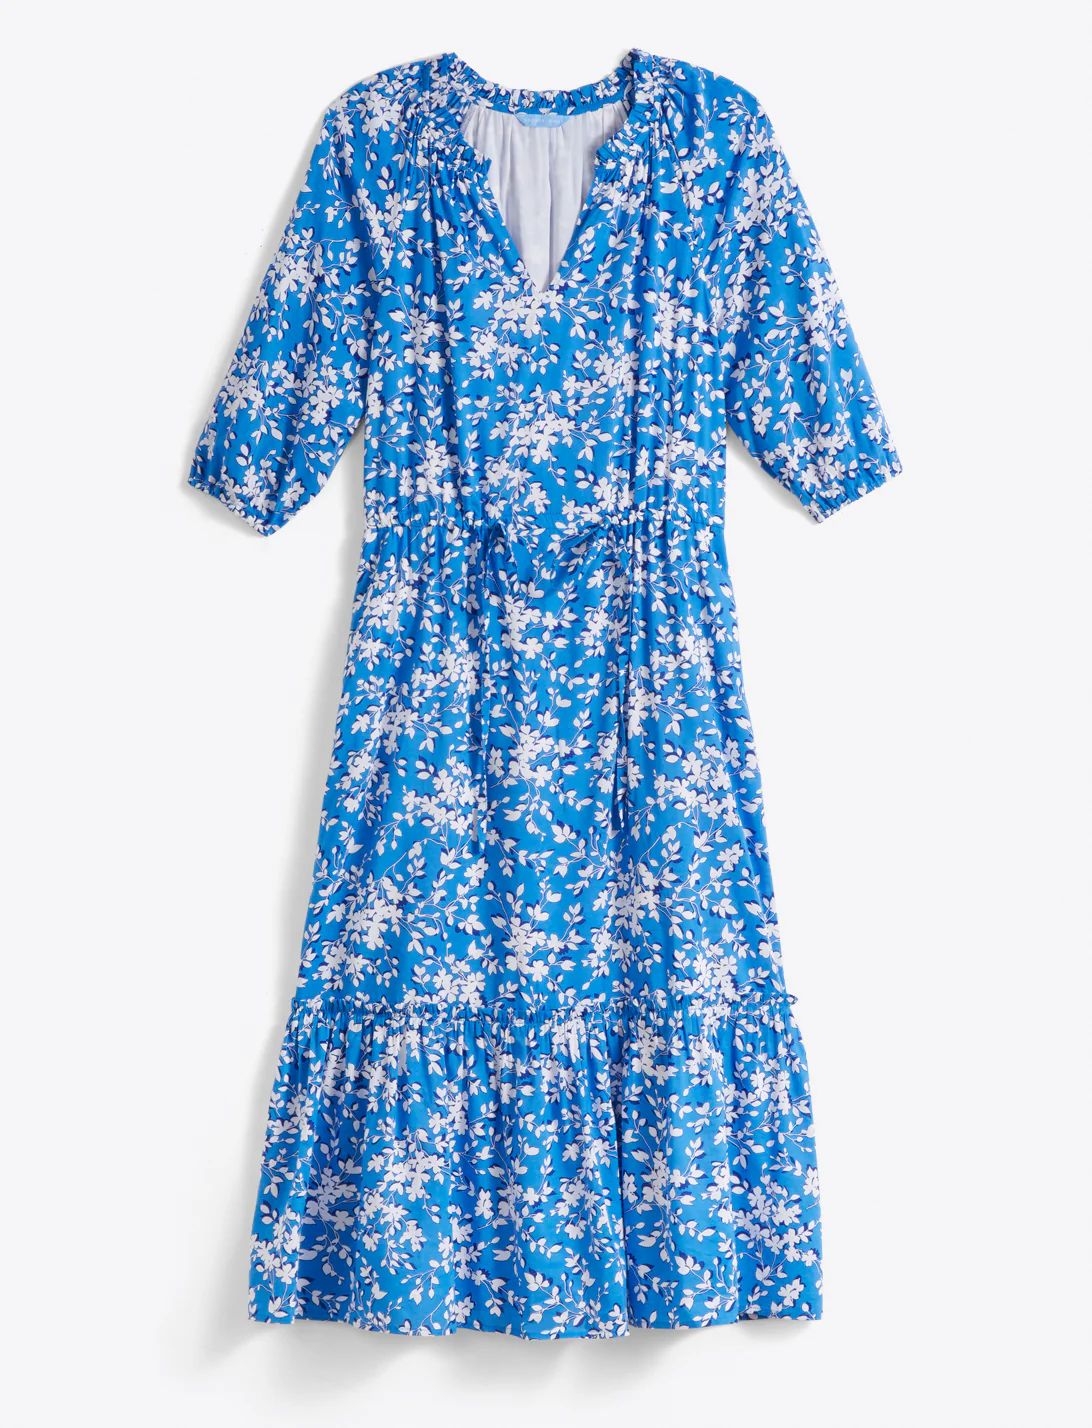 Martina Popover Dress in Bluebell Shadow Floral | Draper James (US)